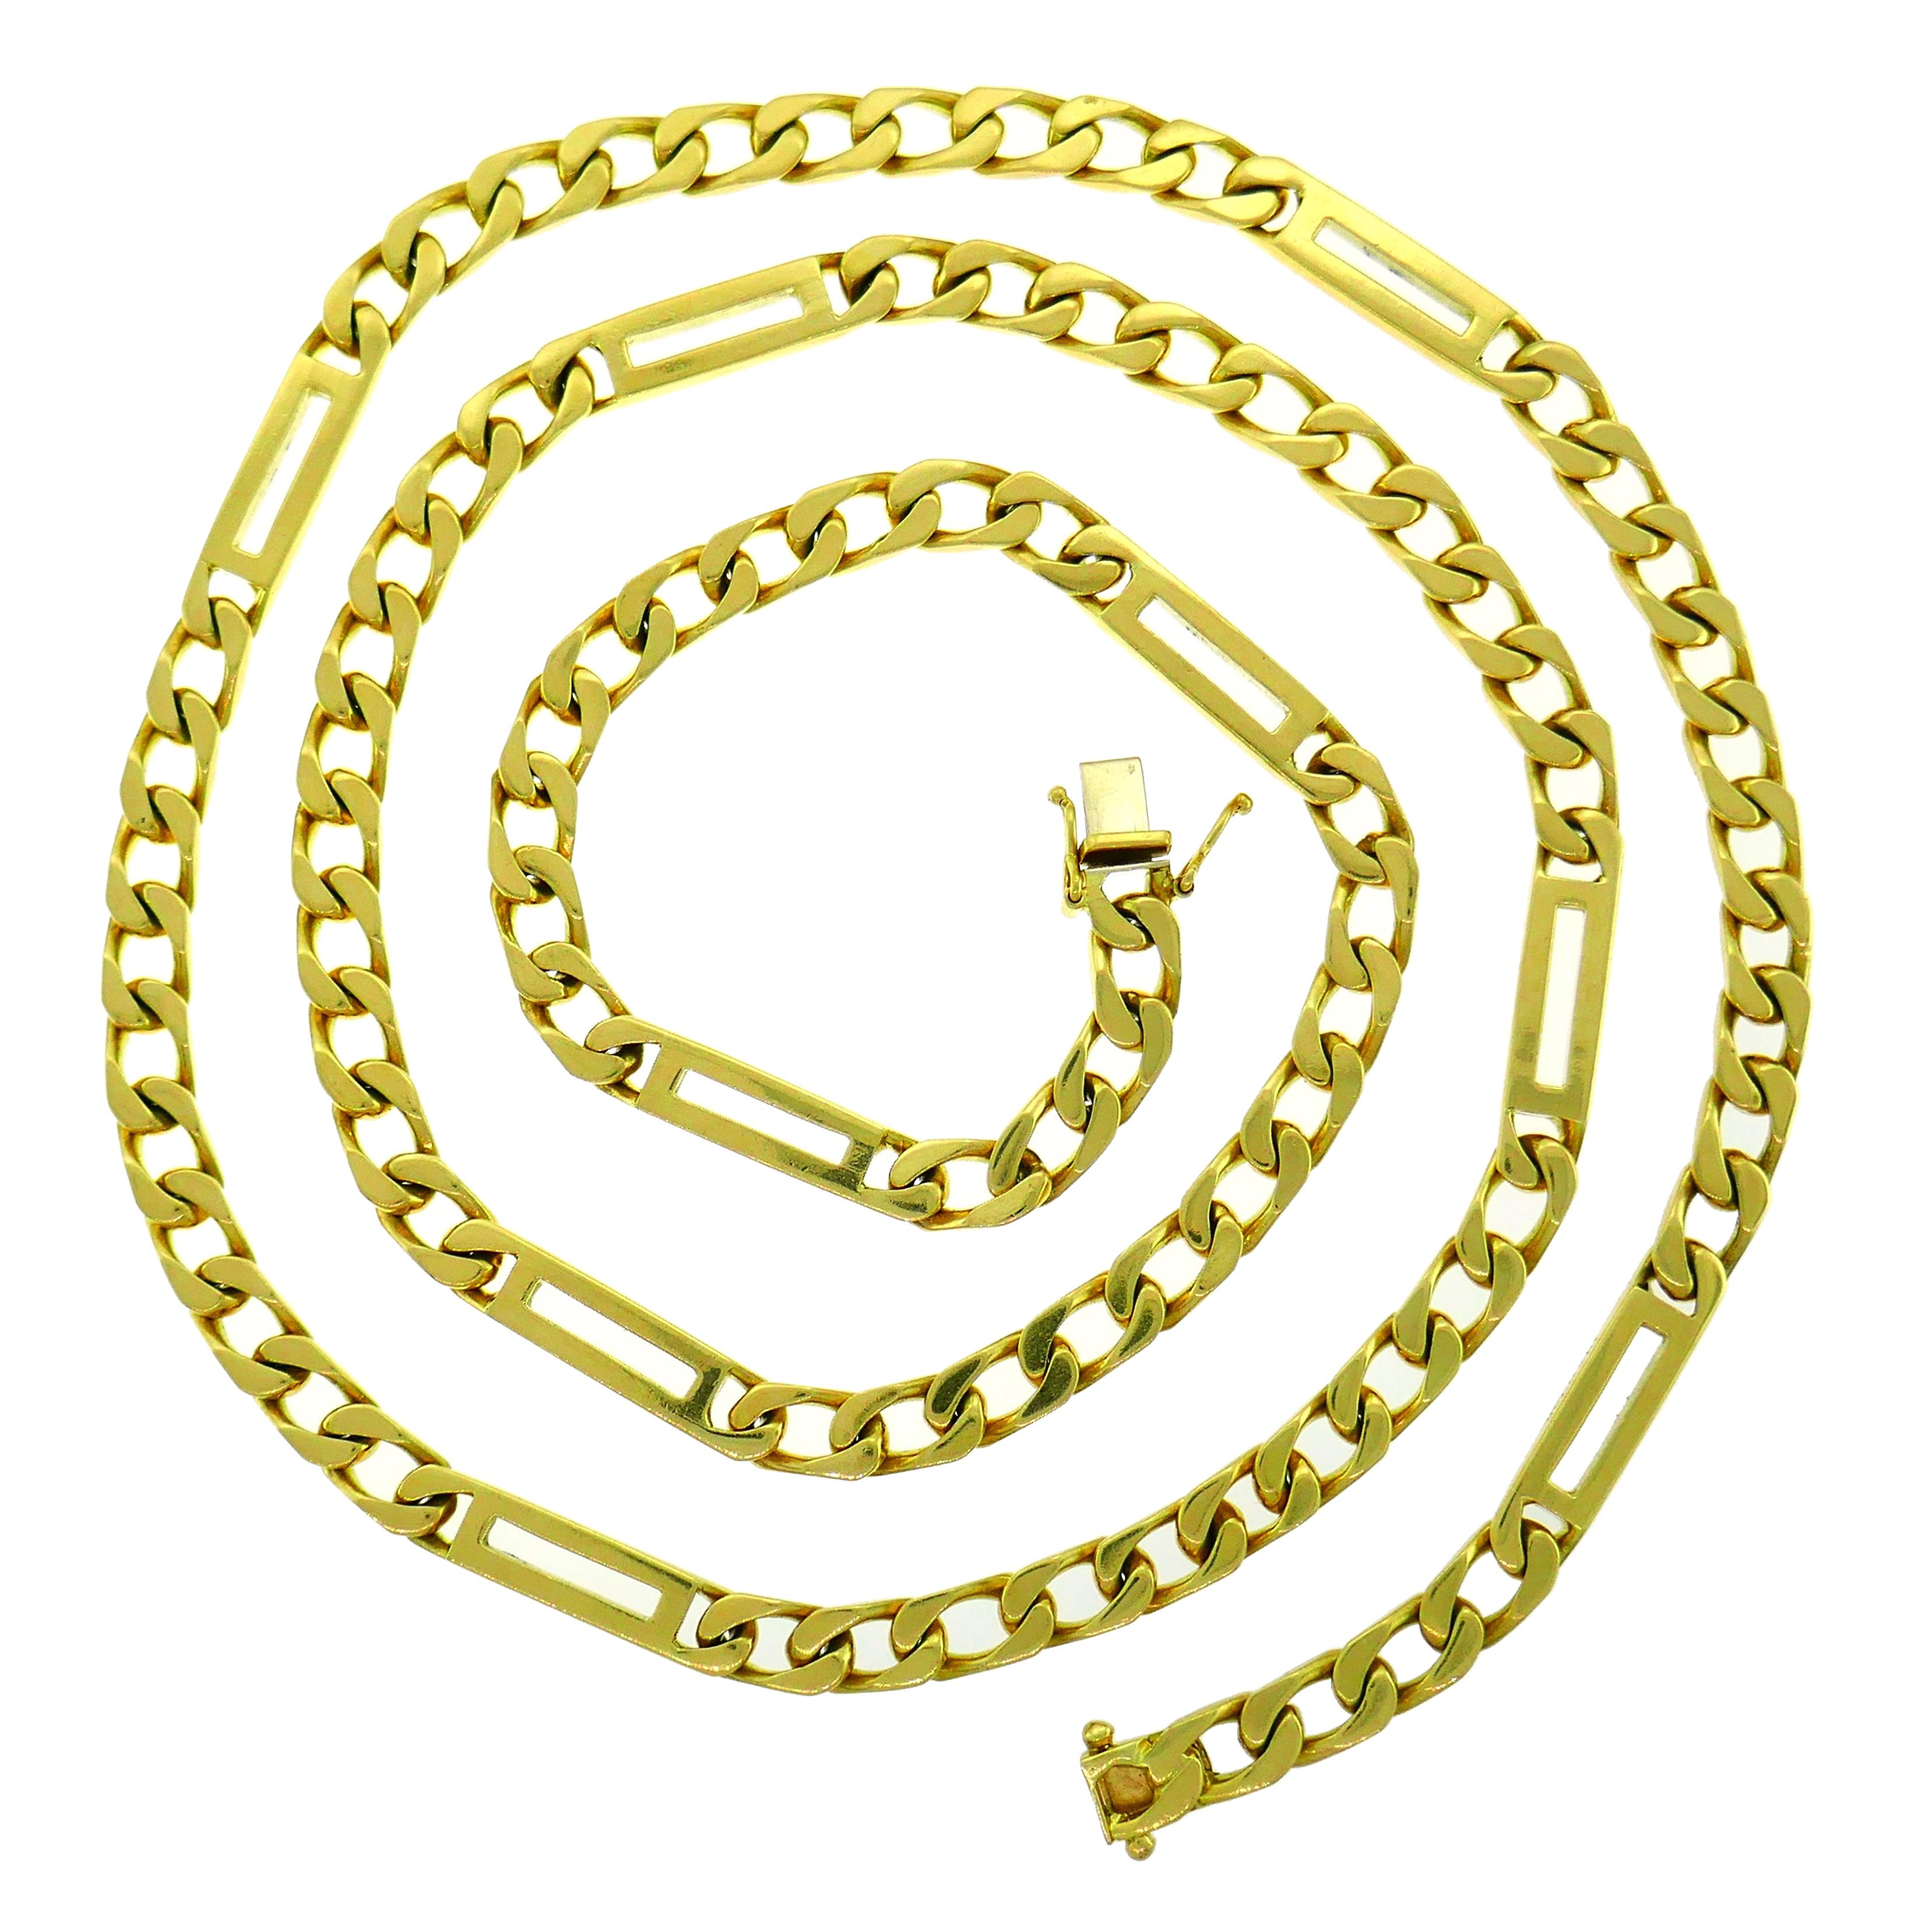 Elegant and stylish chain necklace created by Bulgari in Italy in the 1970's. Substantial and wearable, the necklace is a great addition to your jewelry collection.
It is made of 18 karat (stamped) yellow gold. 
The necklace measures 33 x 1/4 inches